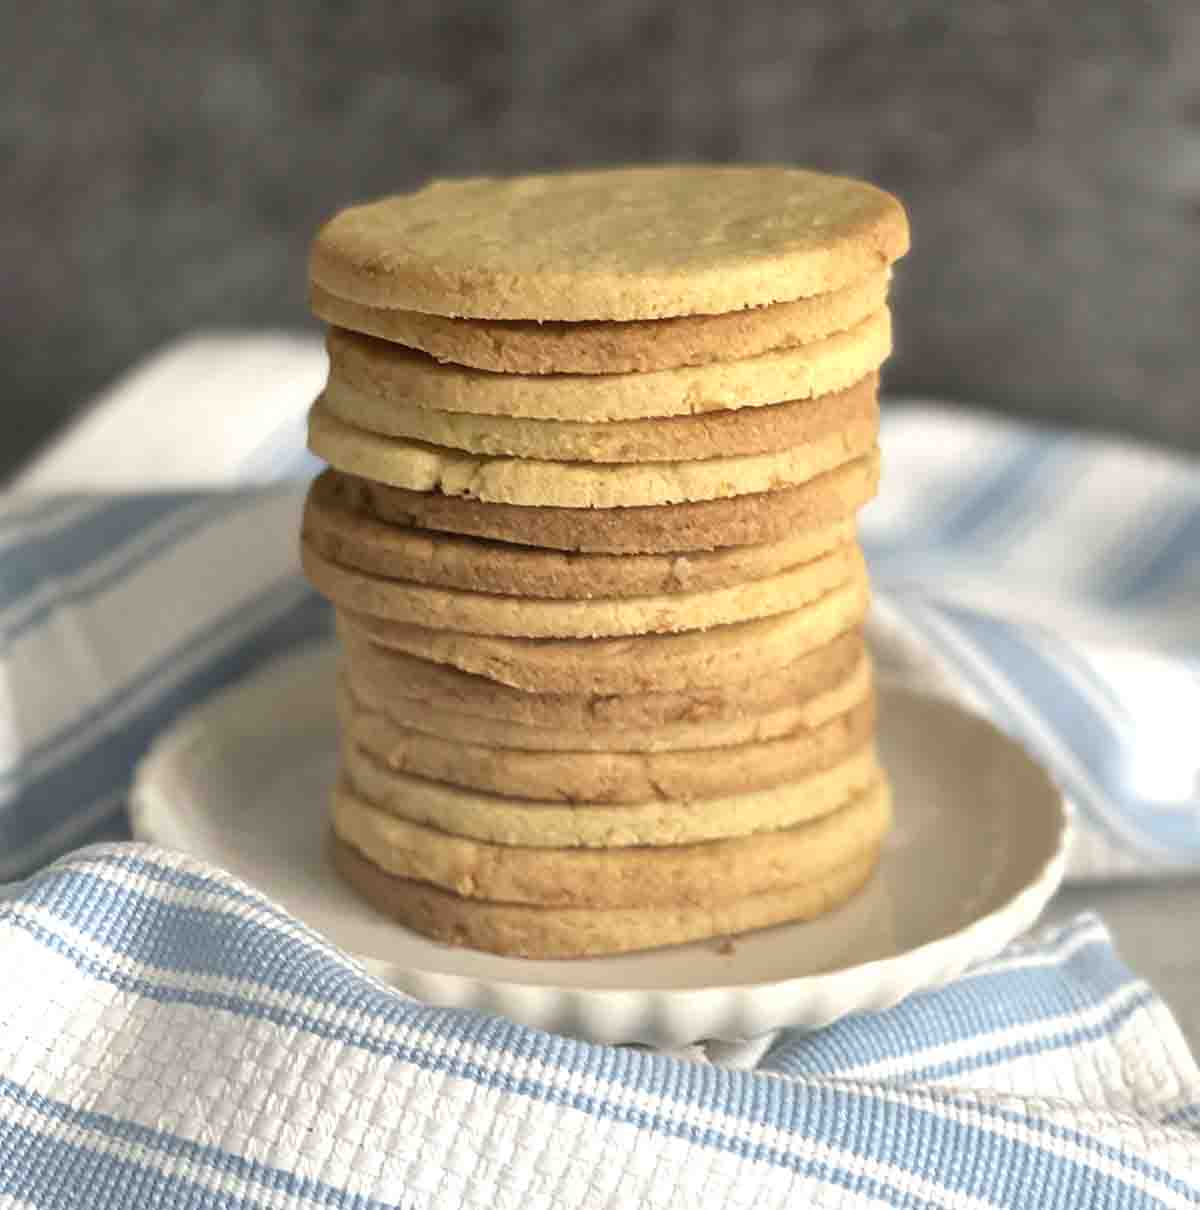 stack of shrewsbury biscuits on a plate.